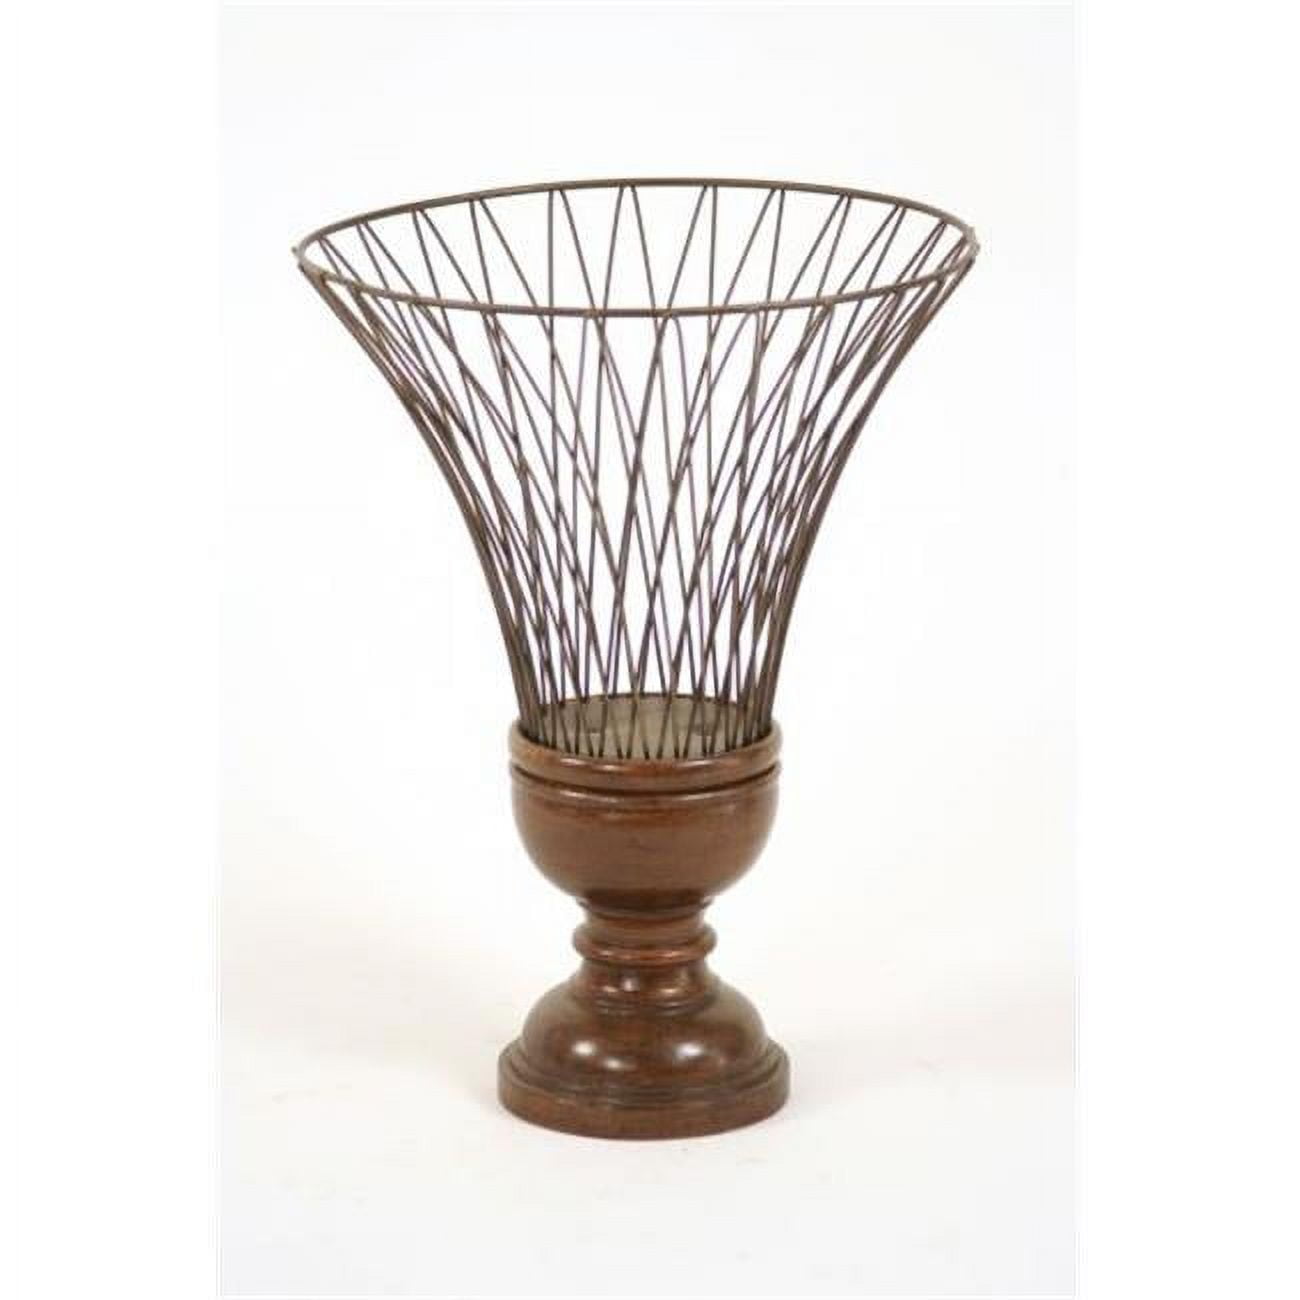 Distinctive Designs Db-261b Wire Urn With Wood Base - Pack Of 2